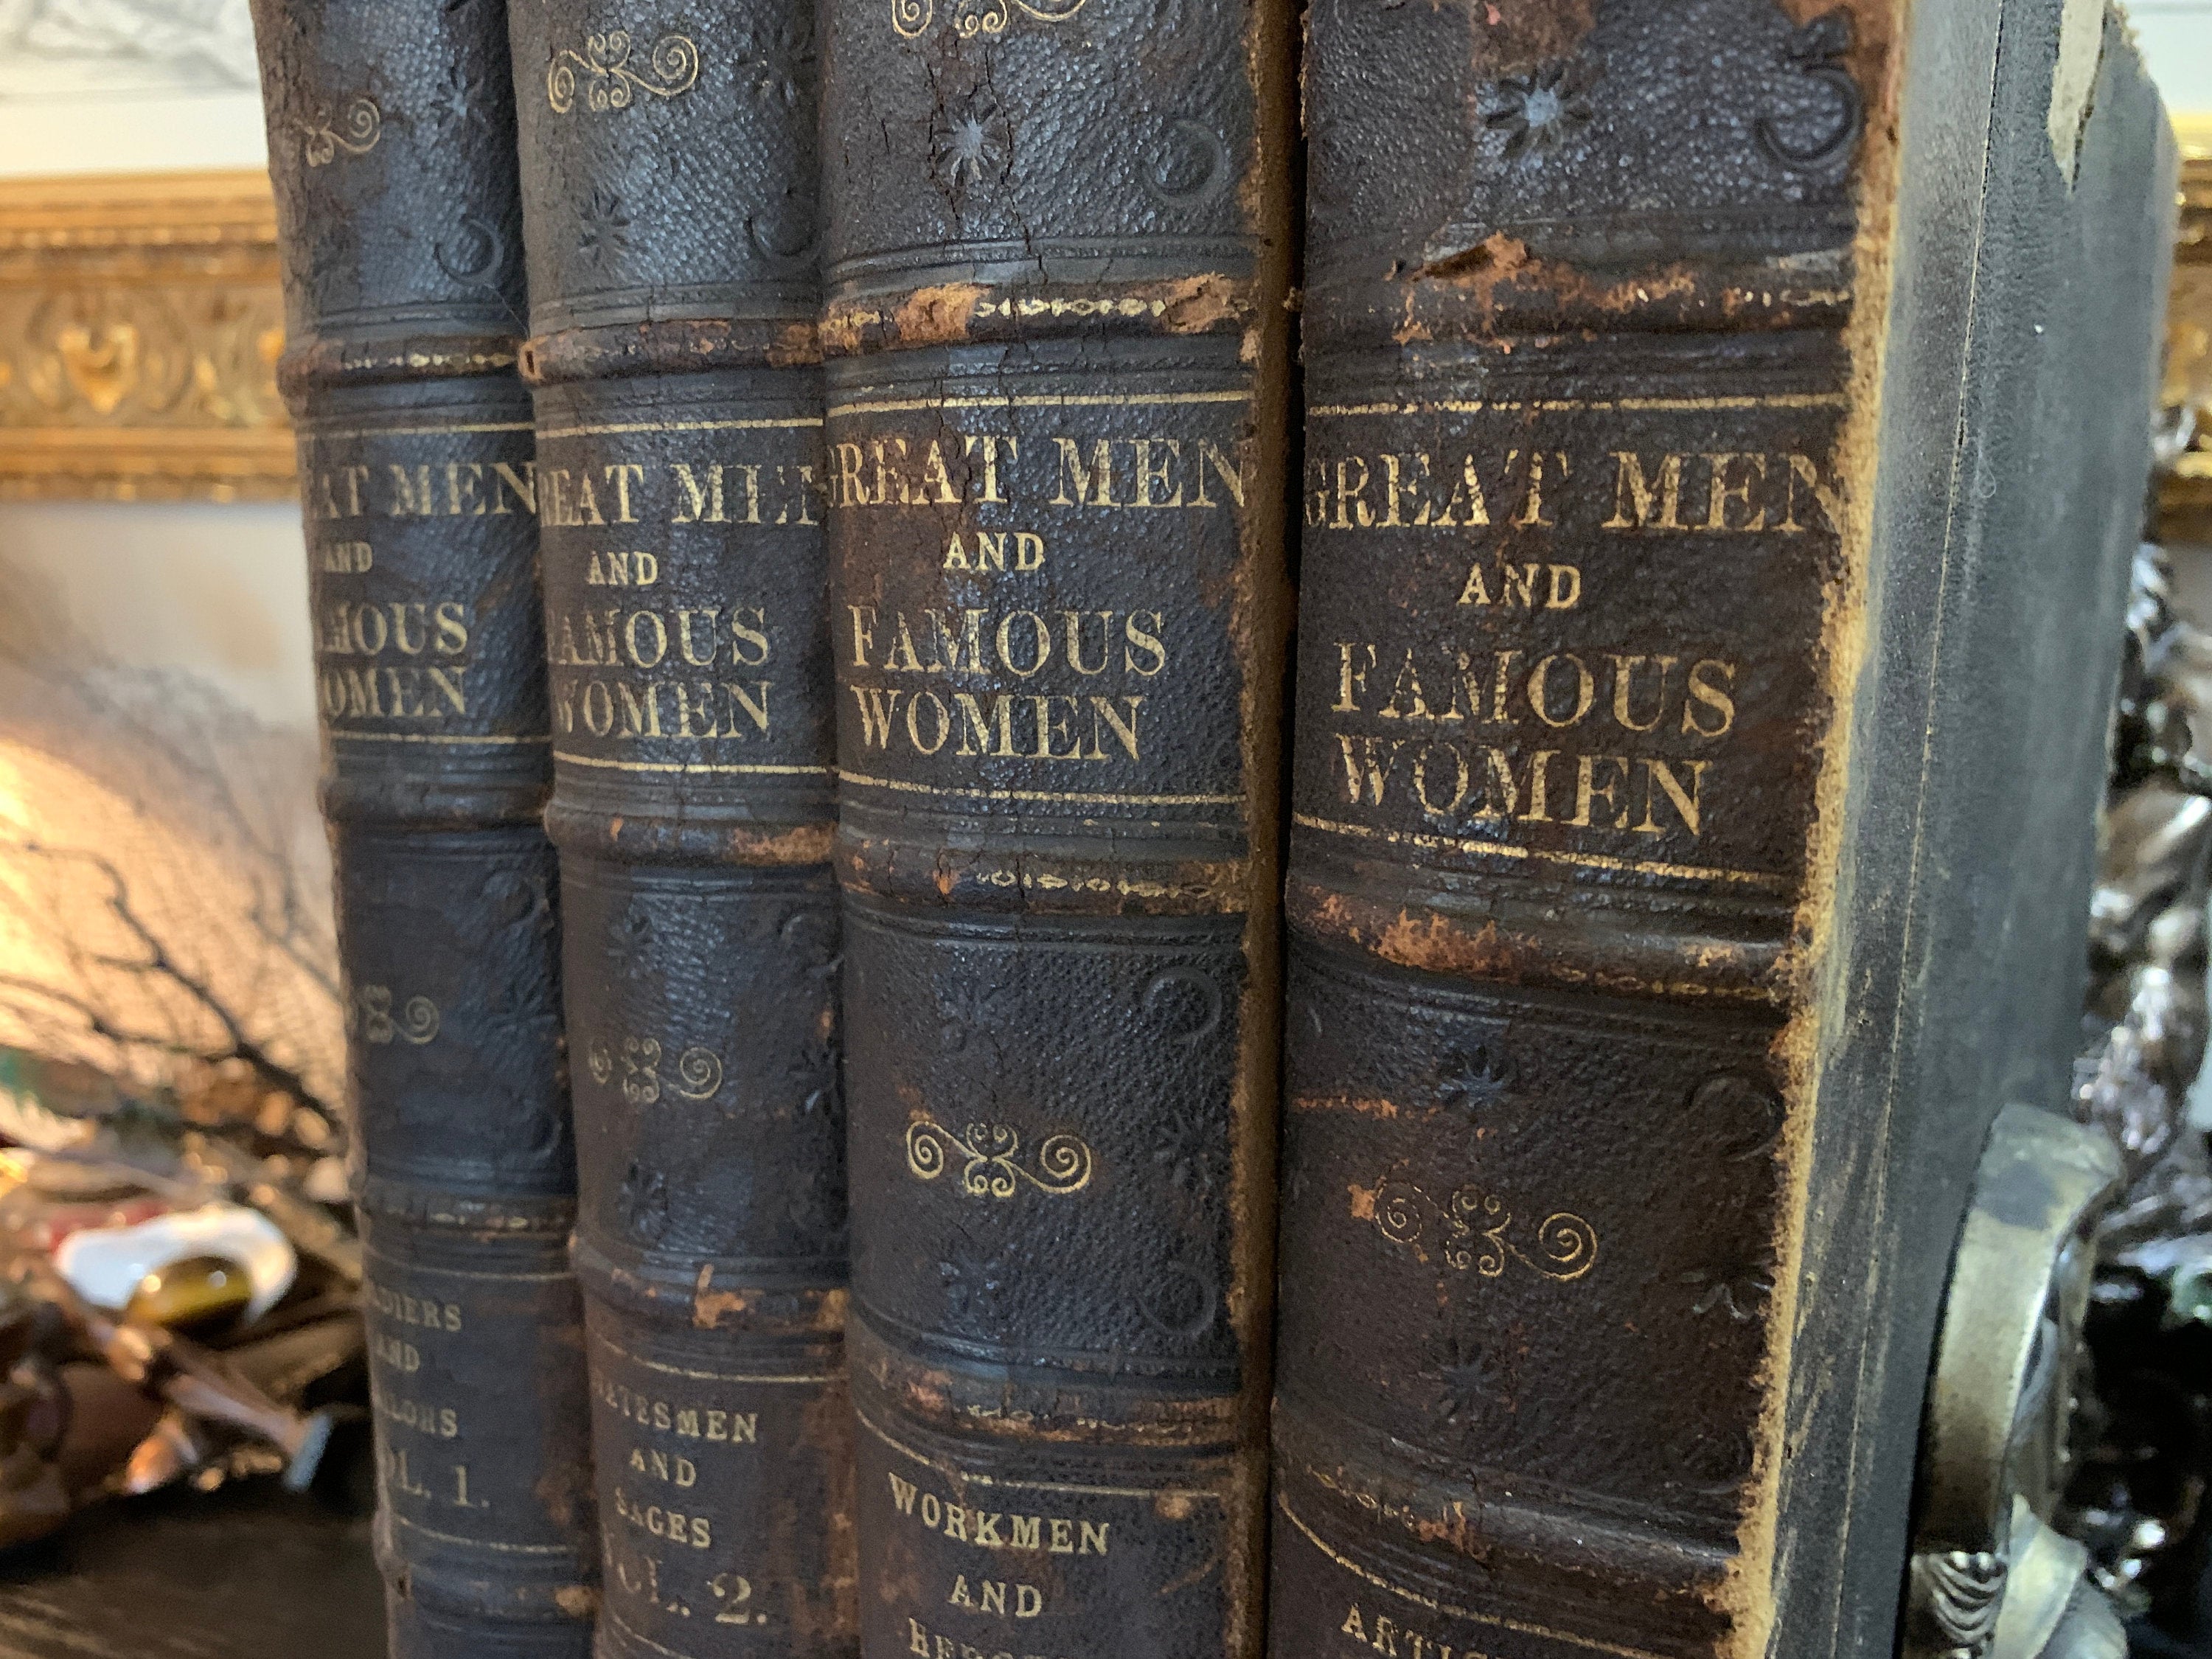 Great Men and Famous Women, Charles F. Horne, Illustrated, Complete in 4 Volumes, 1894